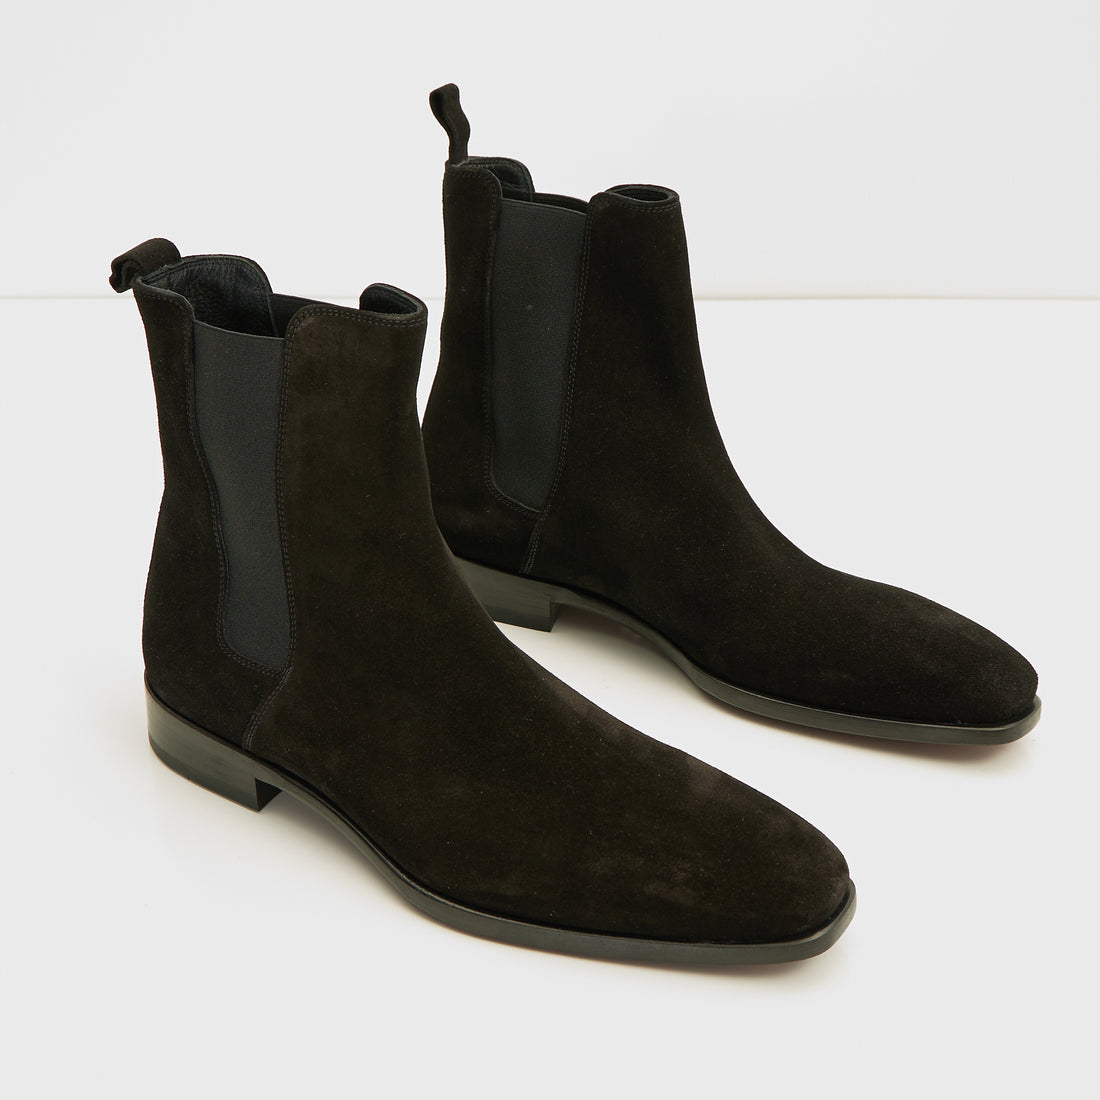 N° D5456 ALL LEATHER ESSENTIAL CHELSEA BOOT - BLACK SUEDE